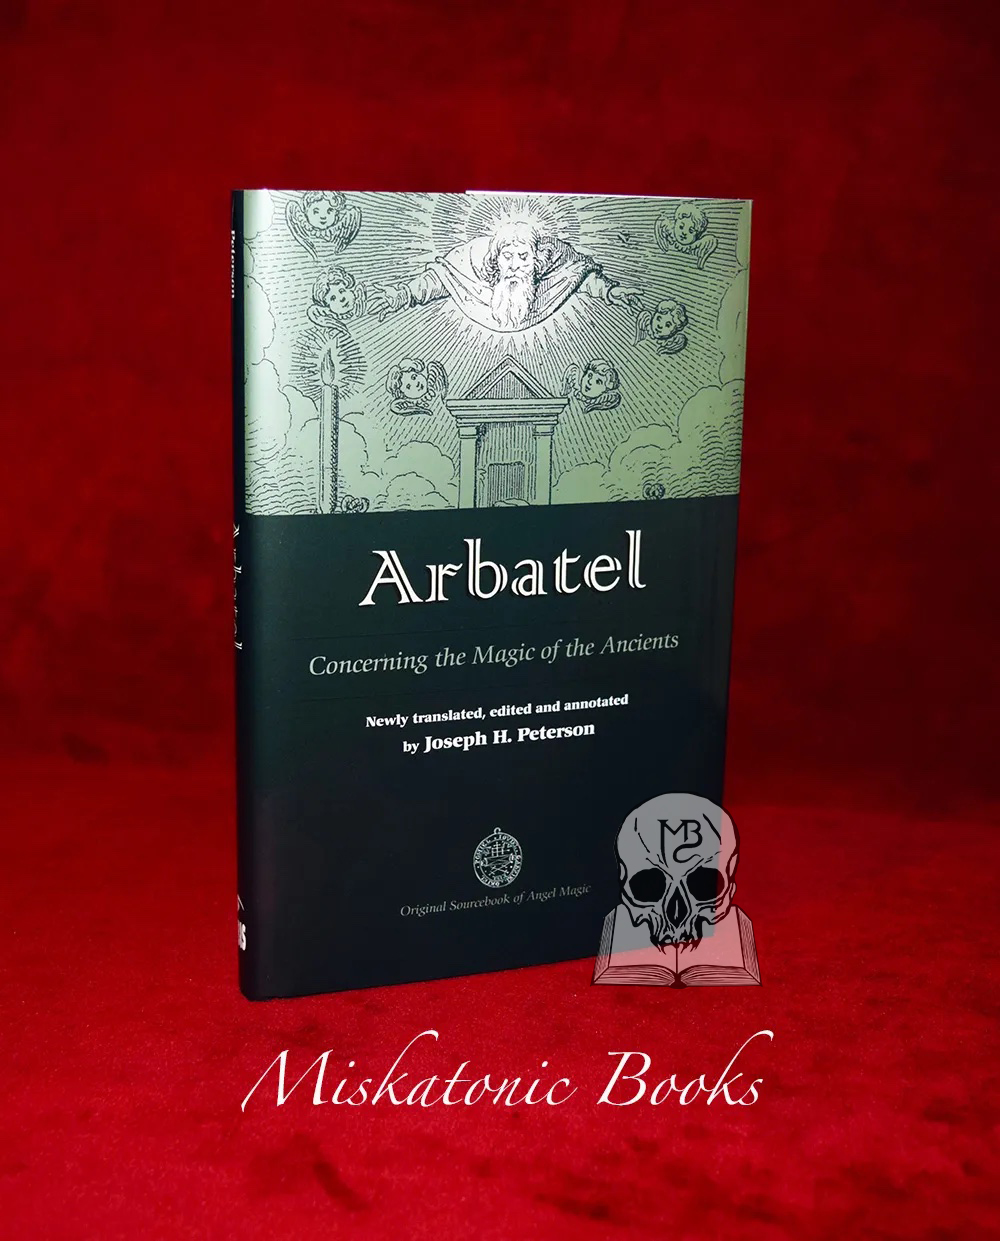 ARBATEL: Concerning the Magic of Ancients by Joseph Peterson (Hardcover Edition)